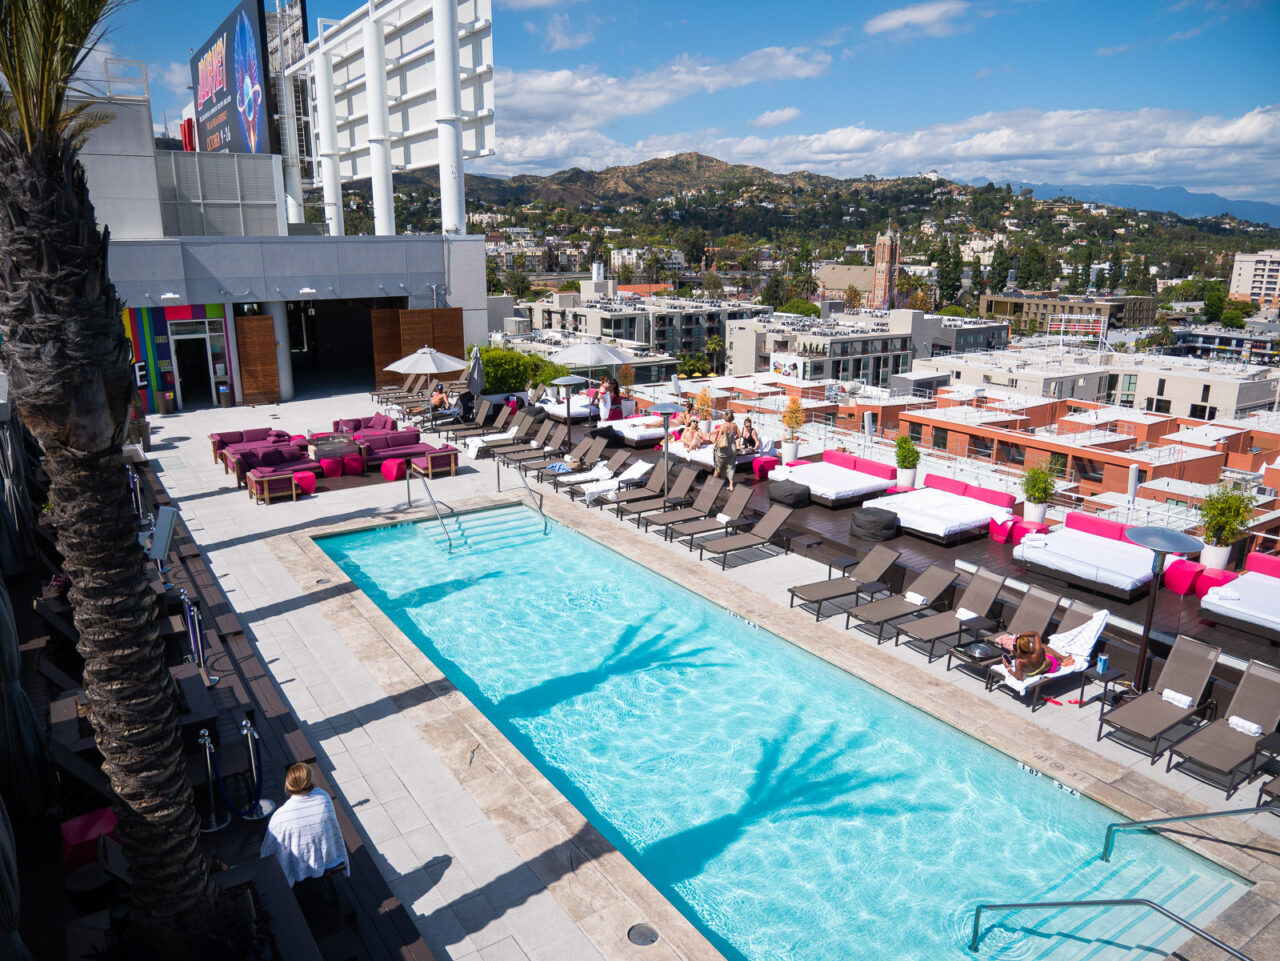 Pool at the W Hotel Hollywood